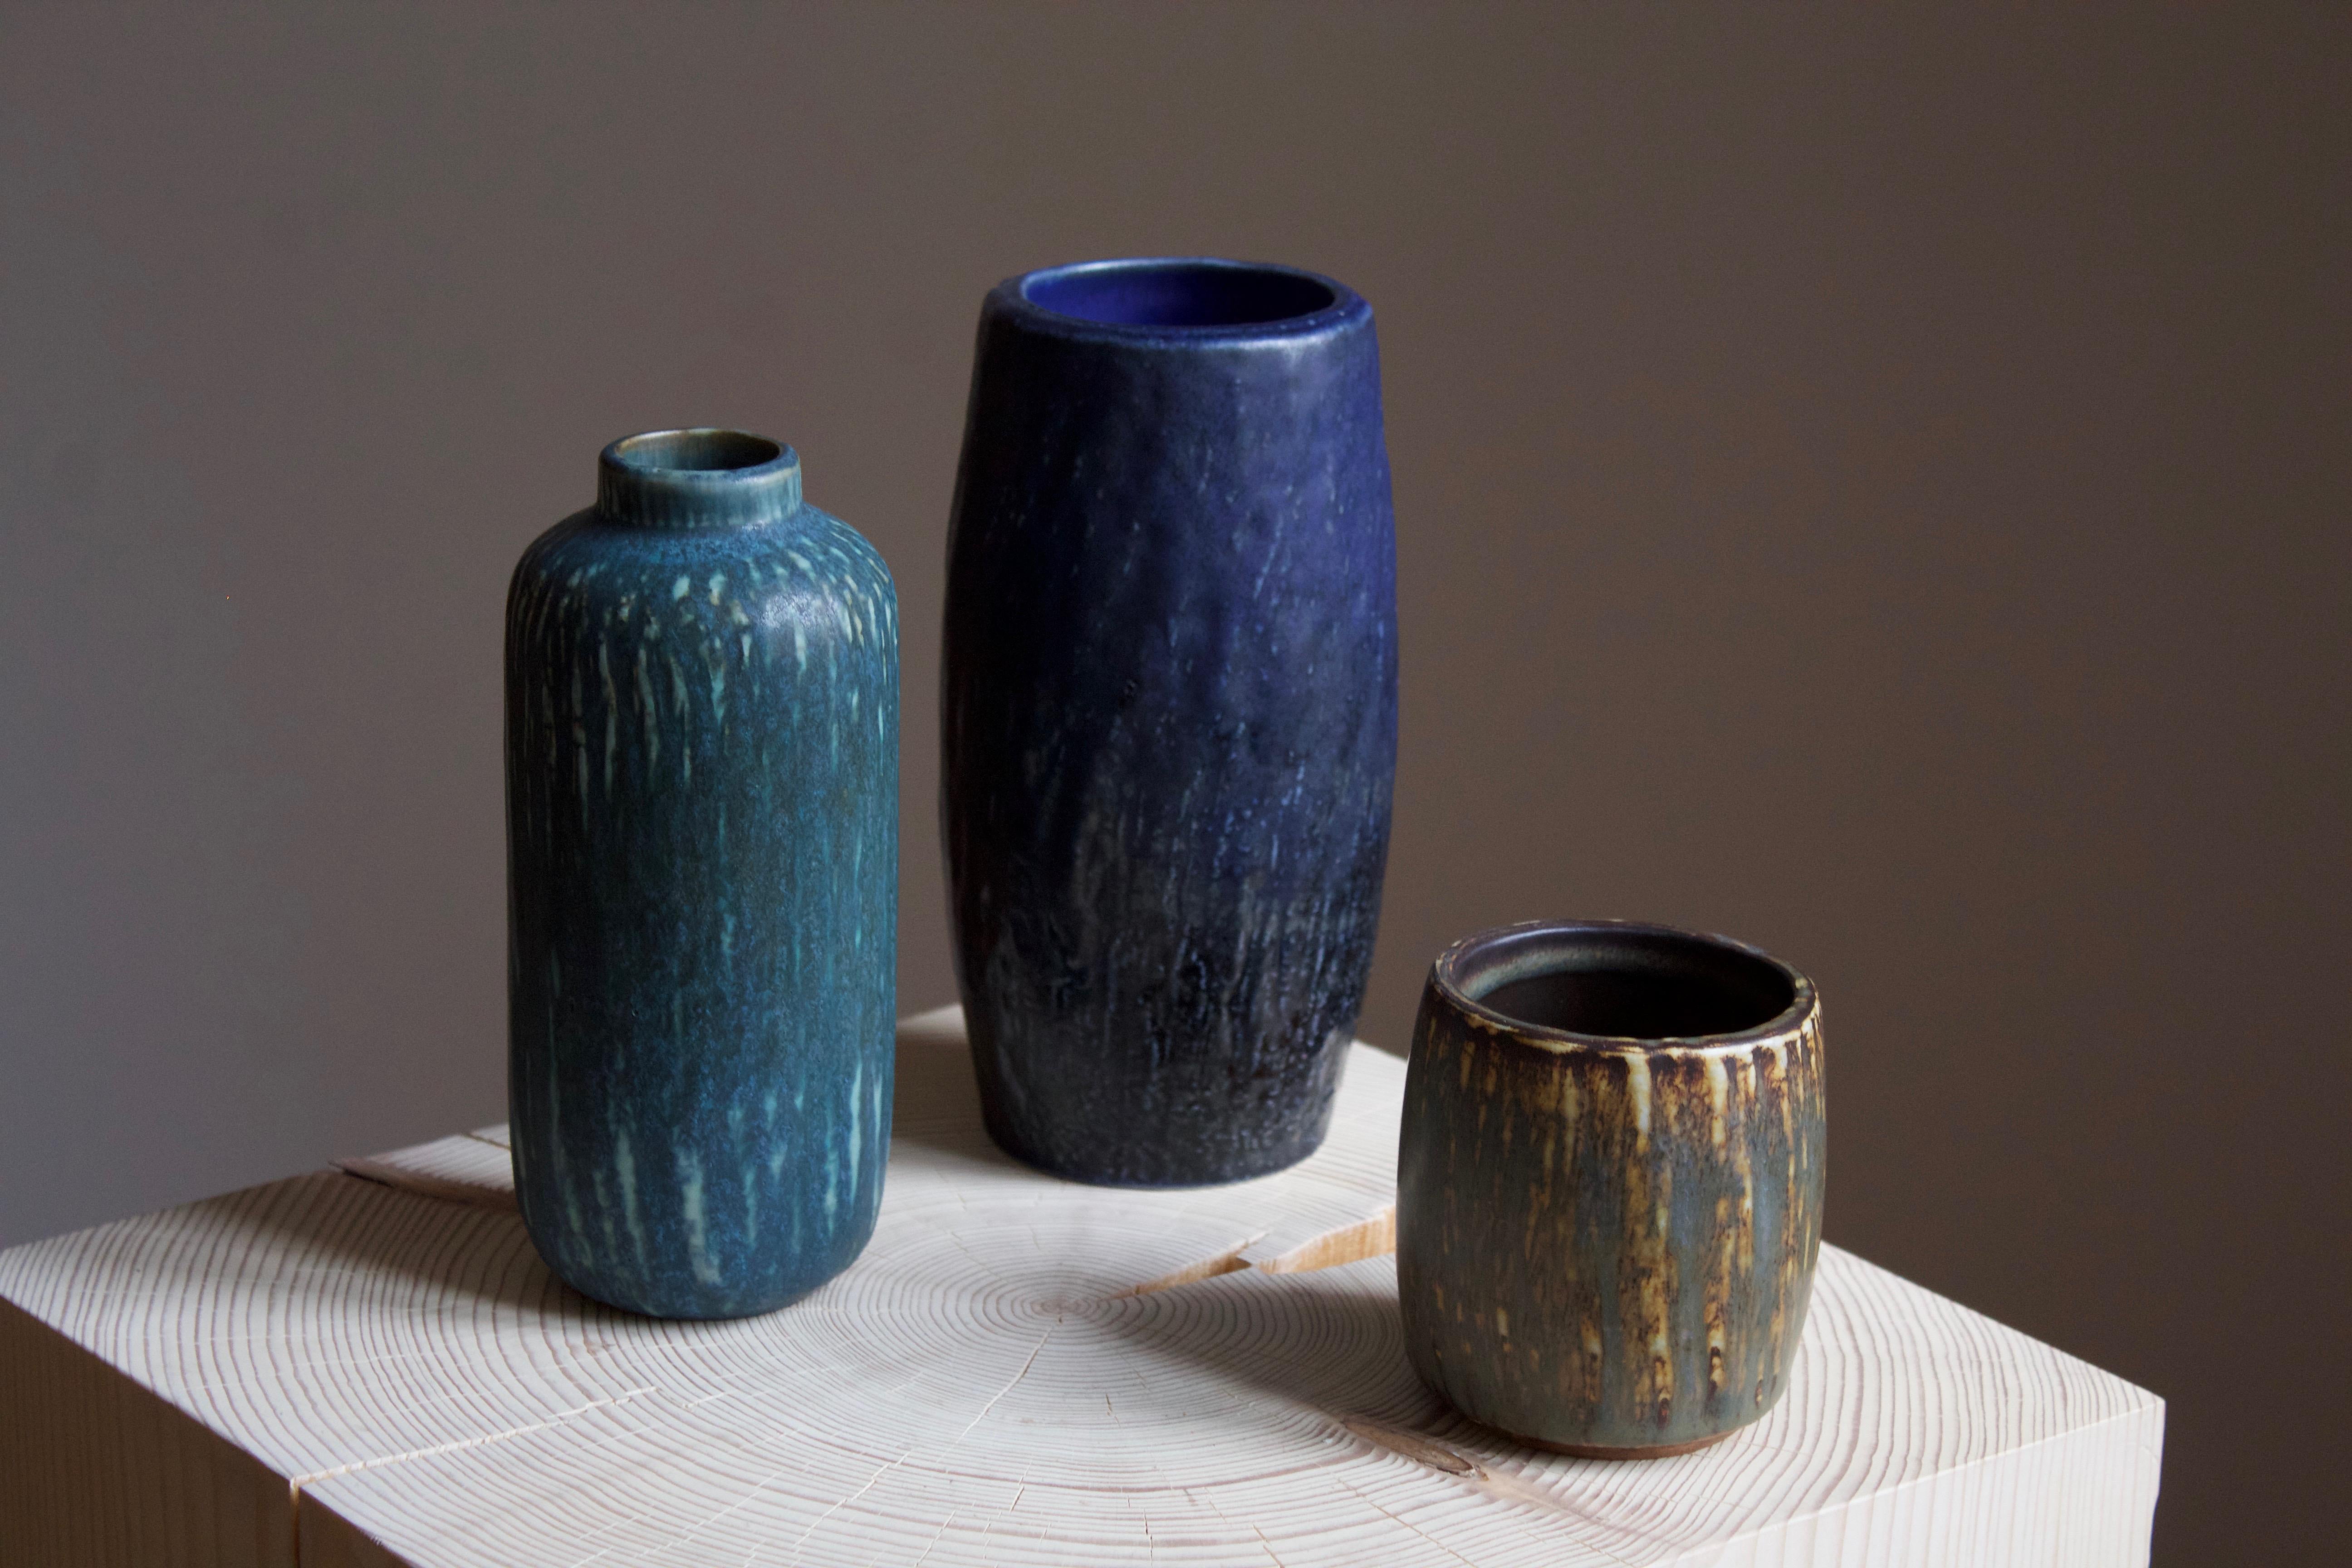 A set of three vases or vessels produced by Rörstrand, Sweden, 1950s. Designed by Gunnar Nylund, (Swedish, 1914-1997). Signed.

Nylund served as artistic director at Rörstrands, where he worked 1931-1955. Prior to his work at Rörstrand he was a